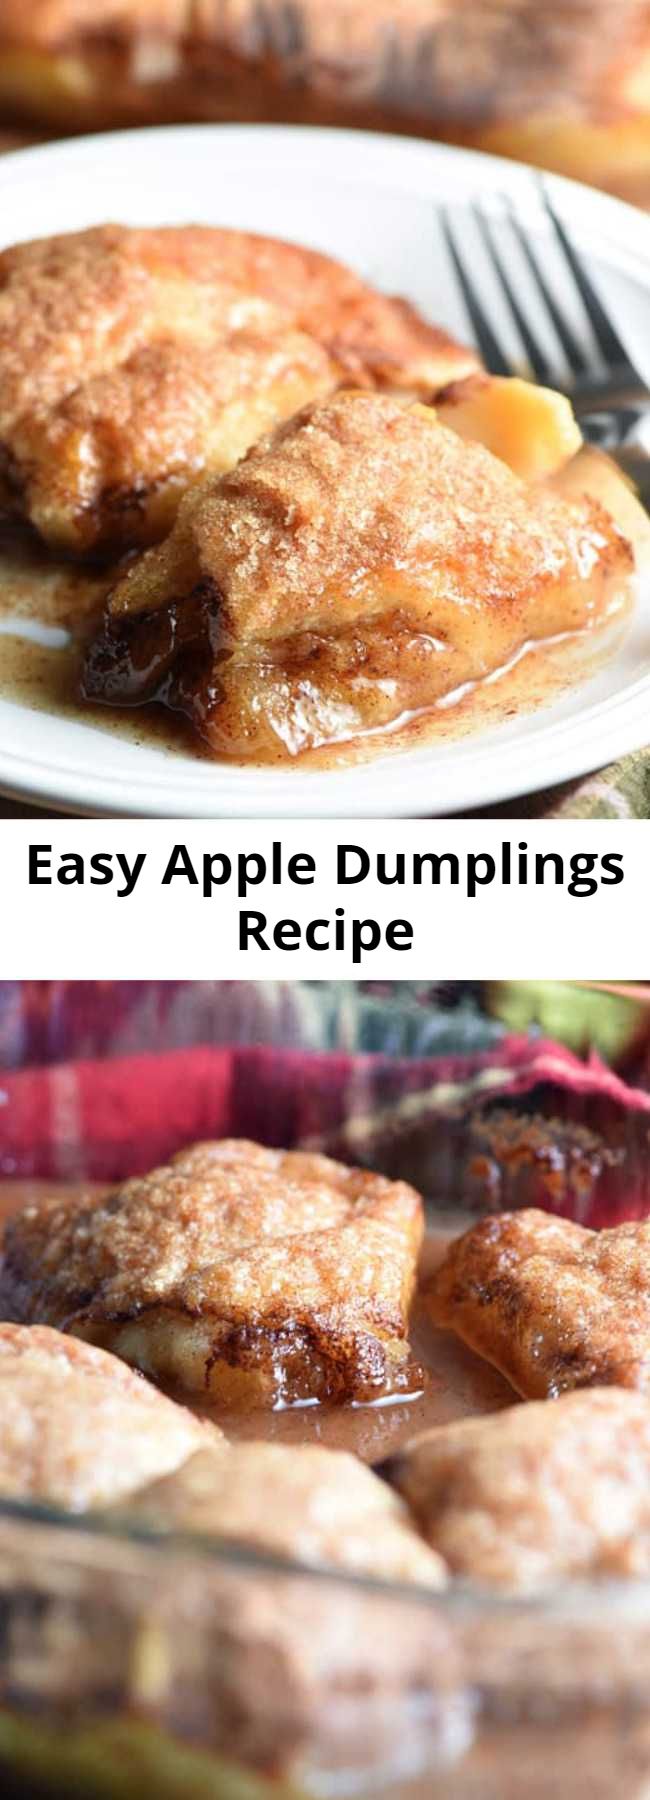 Easy Apple Dumplings Recipe - These Easy Country Apple Dumplings are soft and gooey on the bottom, but crispy on top, and they taste like apple pie. So easy and ridiculously good. Plus the house smells amazing while they bake!